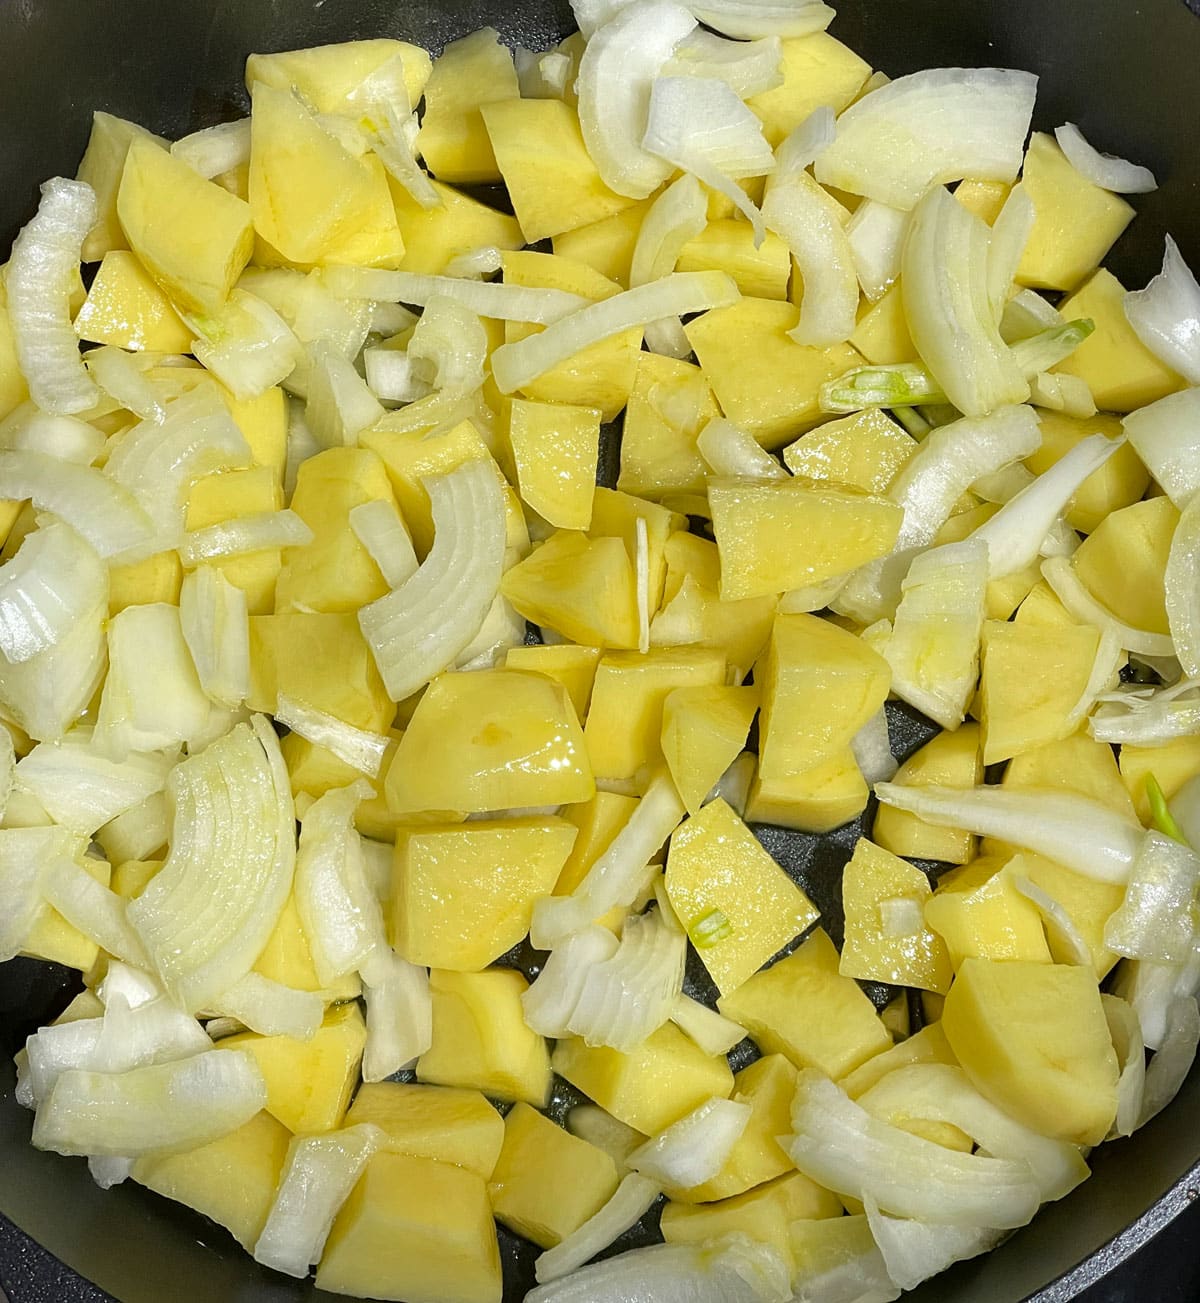 oil mixed with potatoes and onions